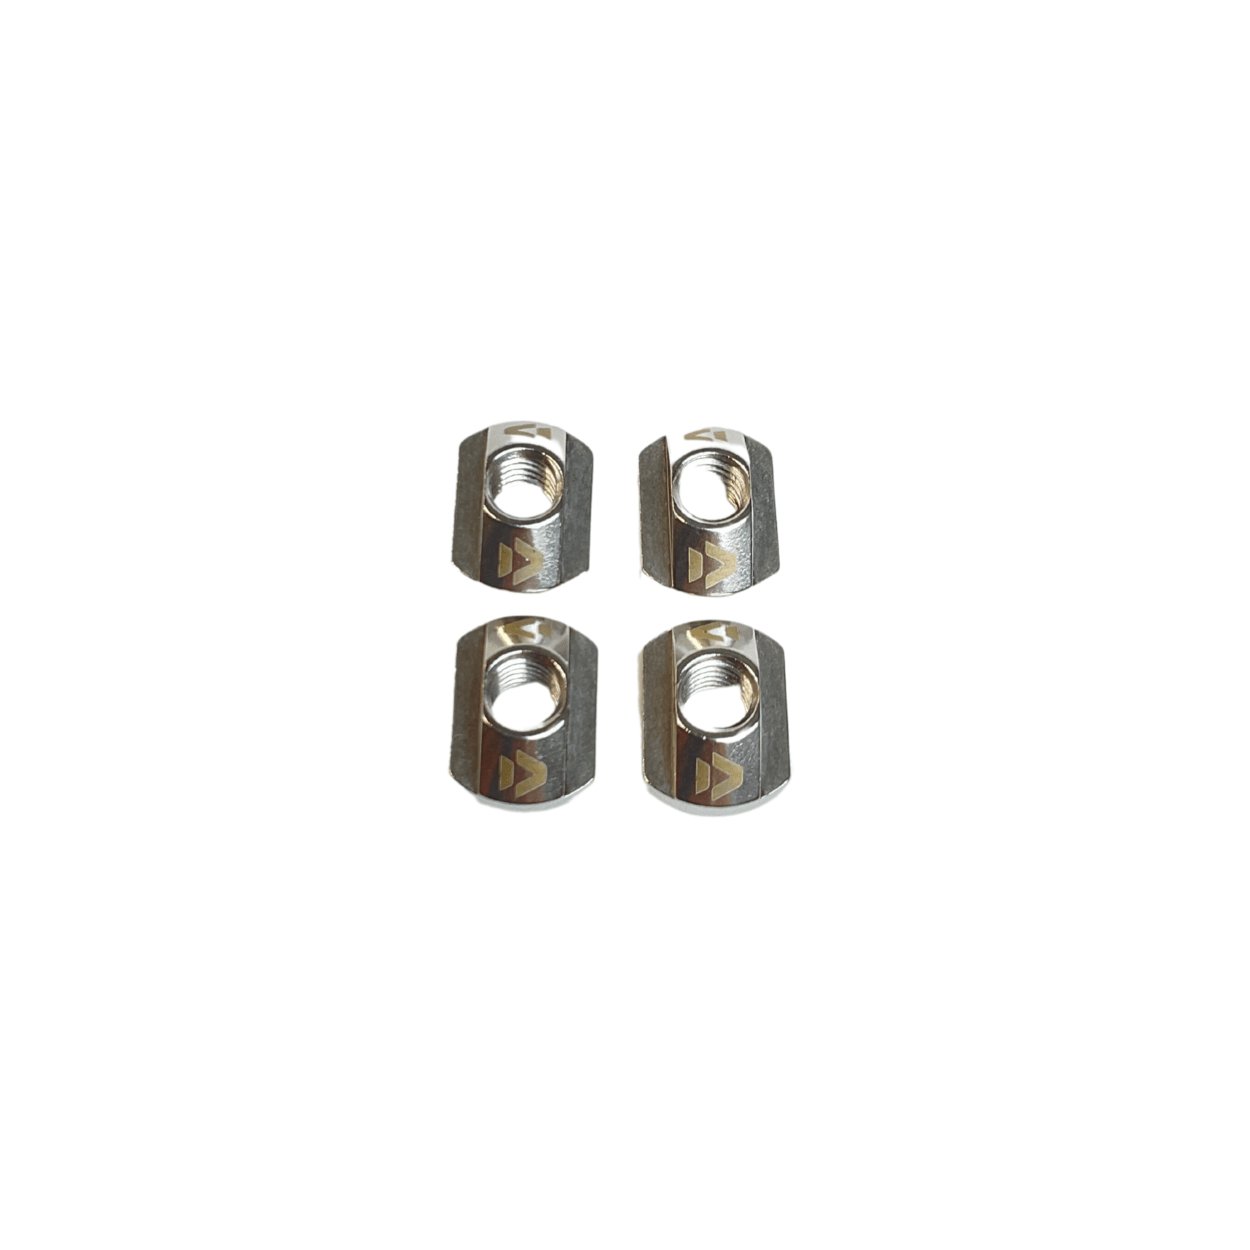 Duotone Stainless Steel (4pcs) 2024 - Worthing Watersports - 9010583187594 - DT Spareparts - Duotone X